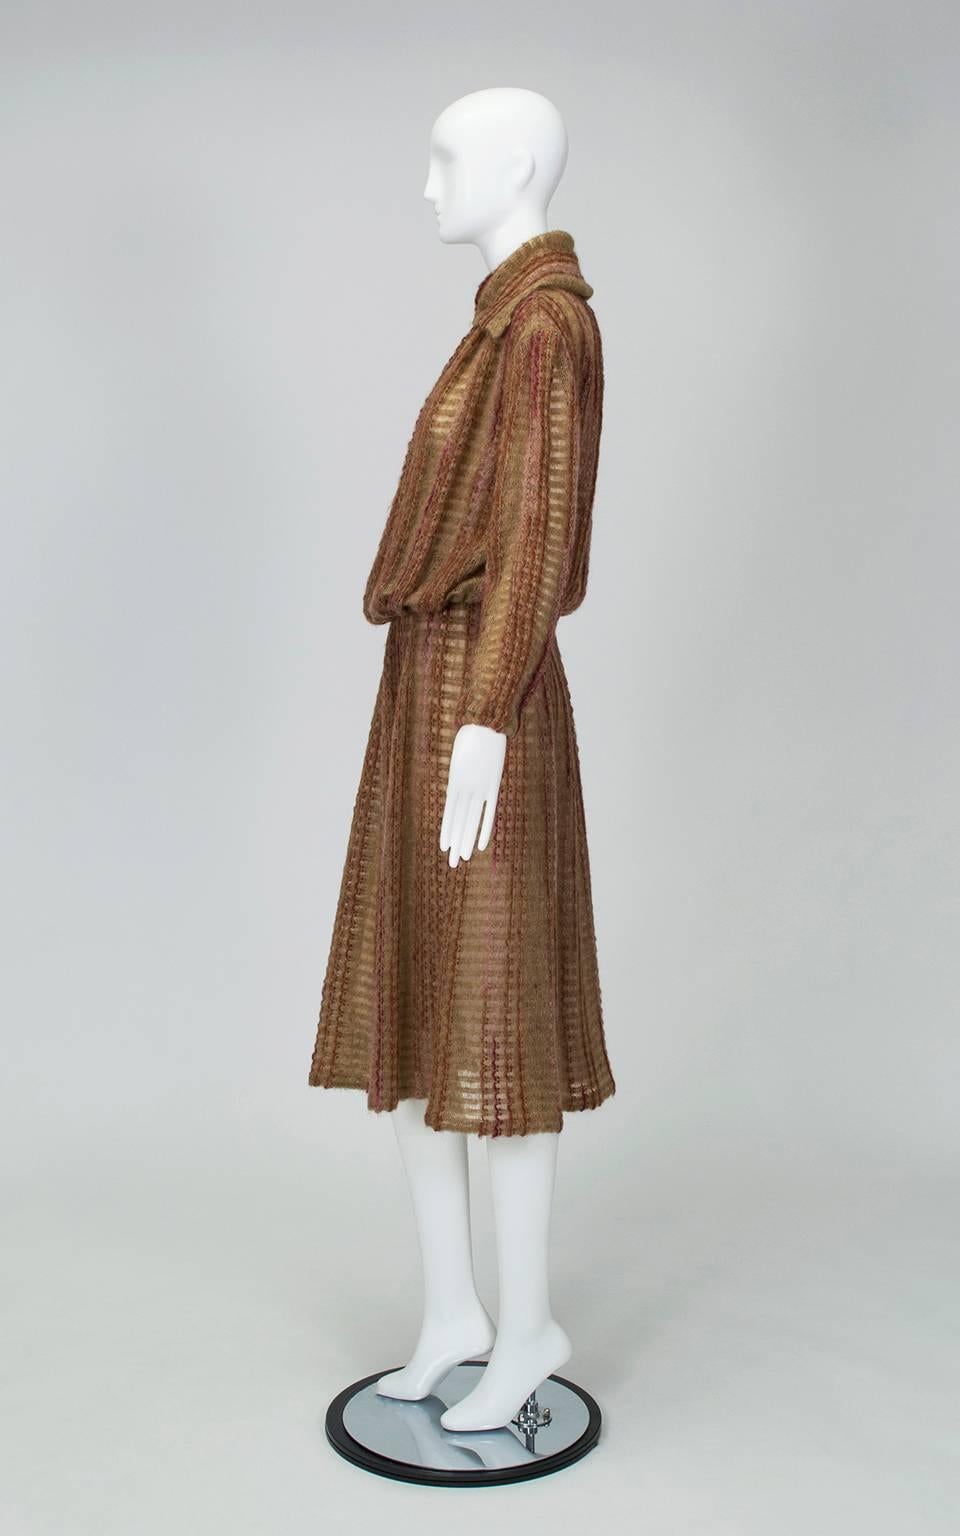 A member of the Royal Society of Arts, fiber artist Kay Cosserat was one of the most prominent and decorated knitwear designers of the 20th century. Her untimely death left few pieces in circulation, and most are currently housed in the Victoria &